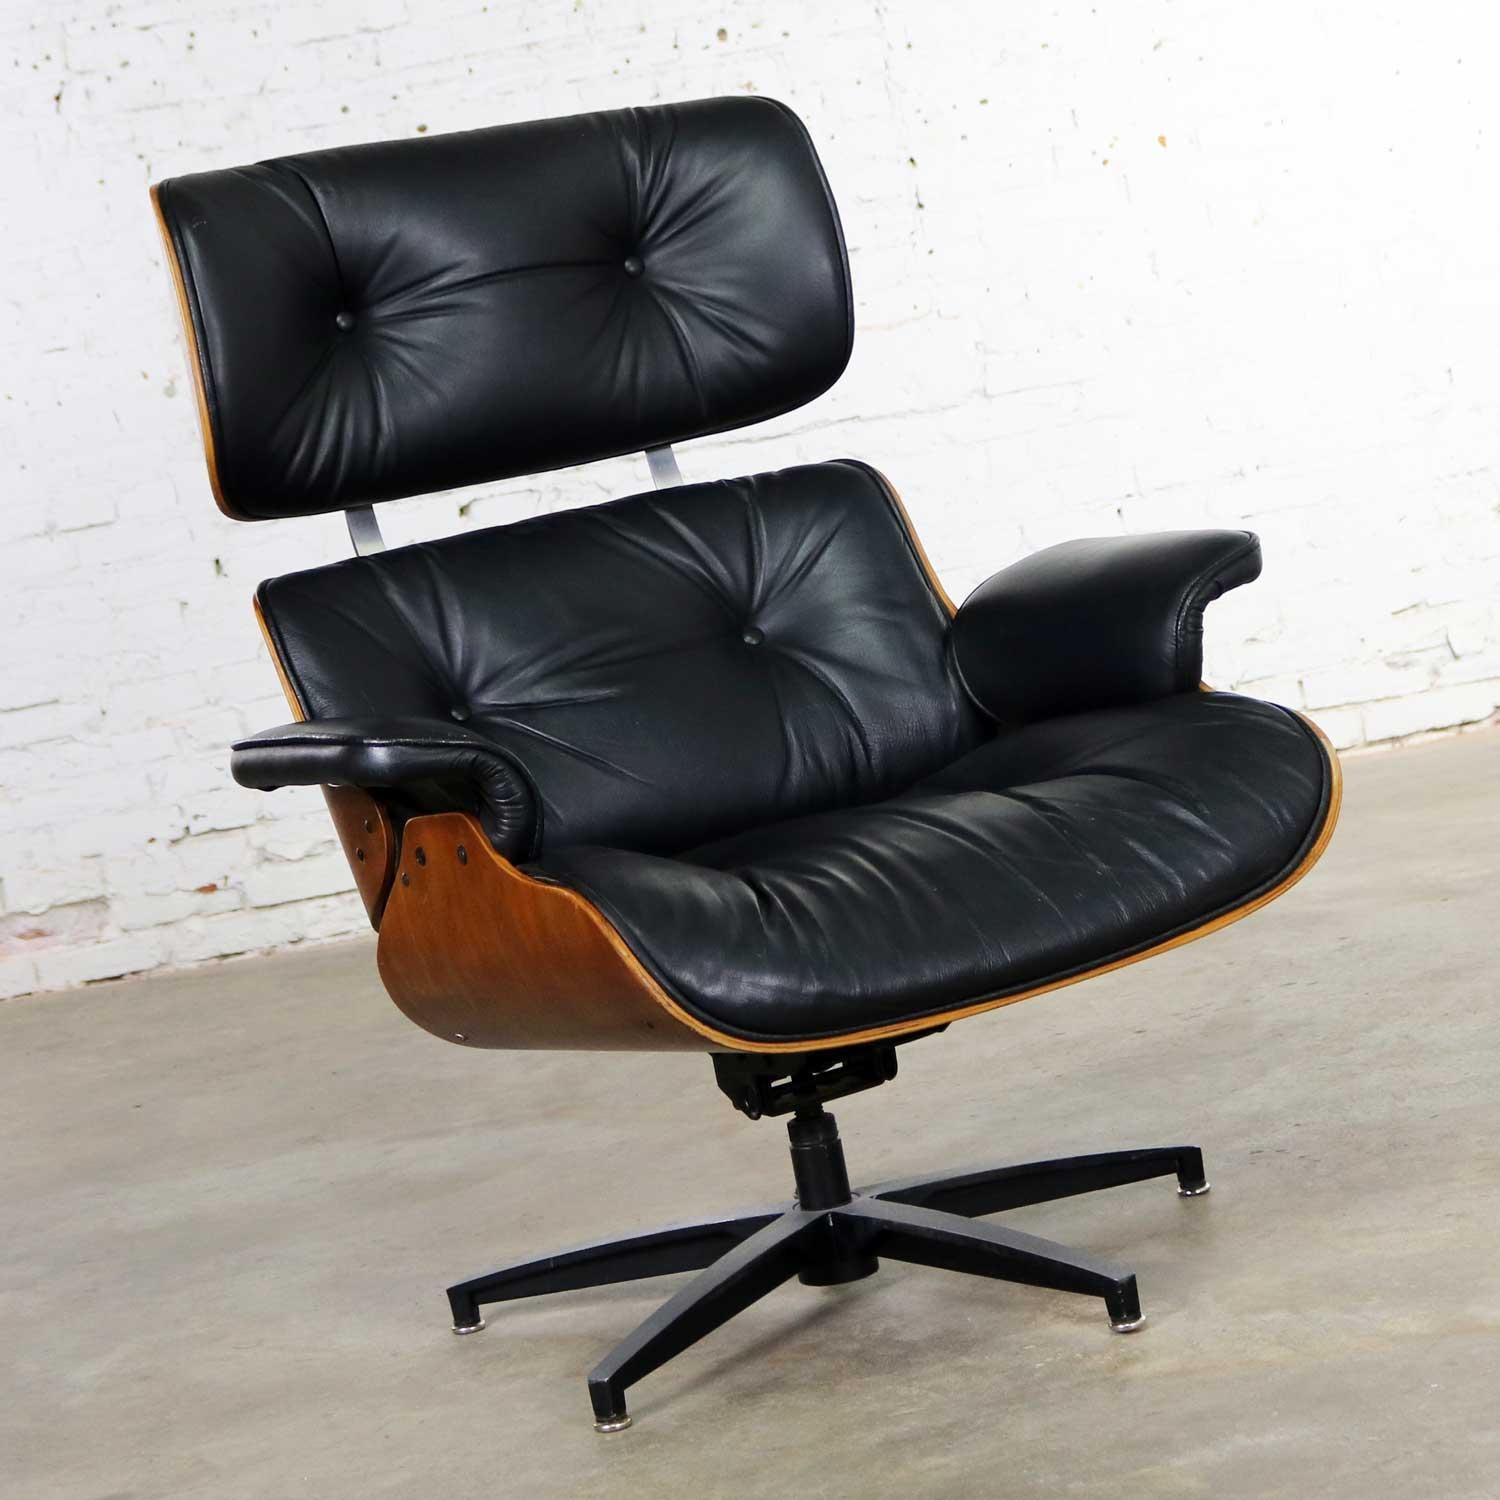 Handsome Selig black vinyl and walnut Mid-Century Modern lounge chair in the style of the famed Eames lounge chair by Herman Miller. It is wonderful vintage condition overall. There are some nicks and dings to the wood and a couple small blemishes